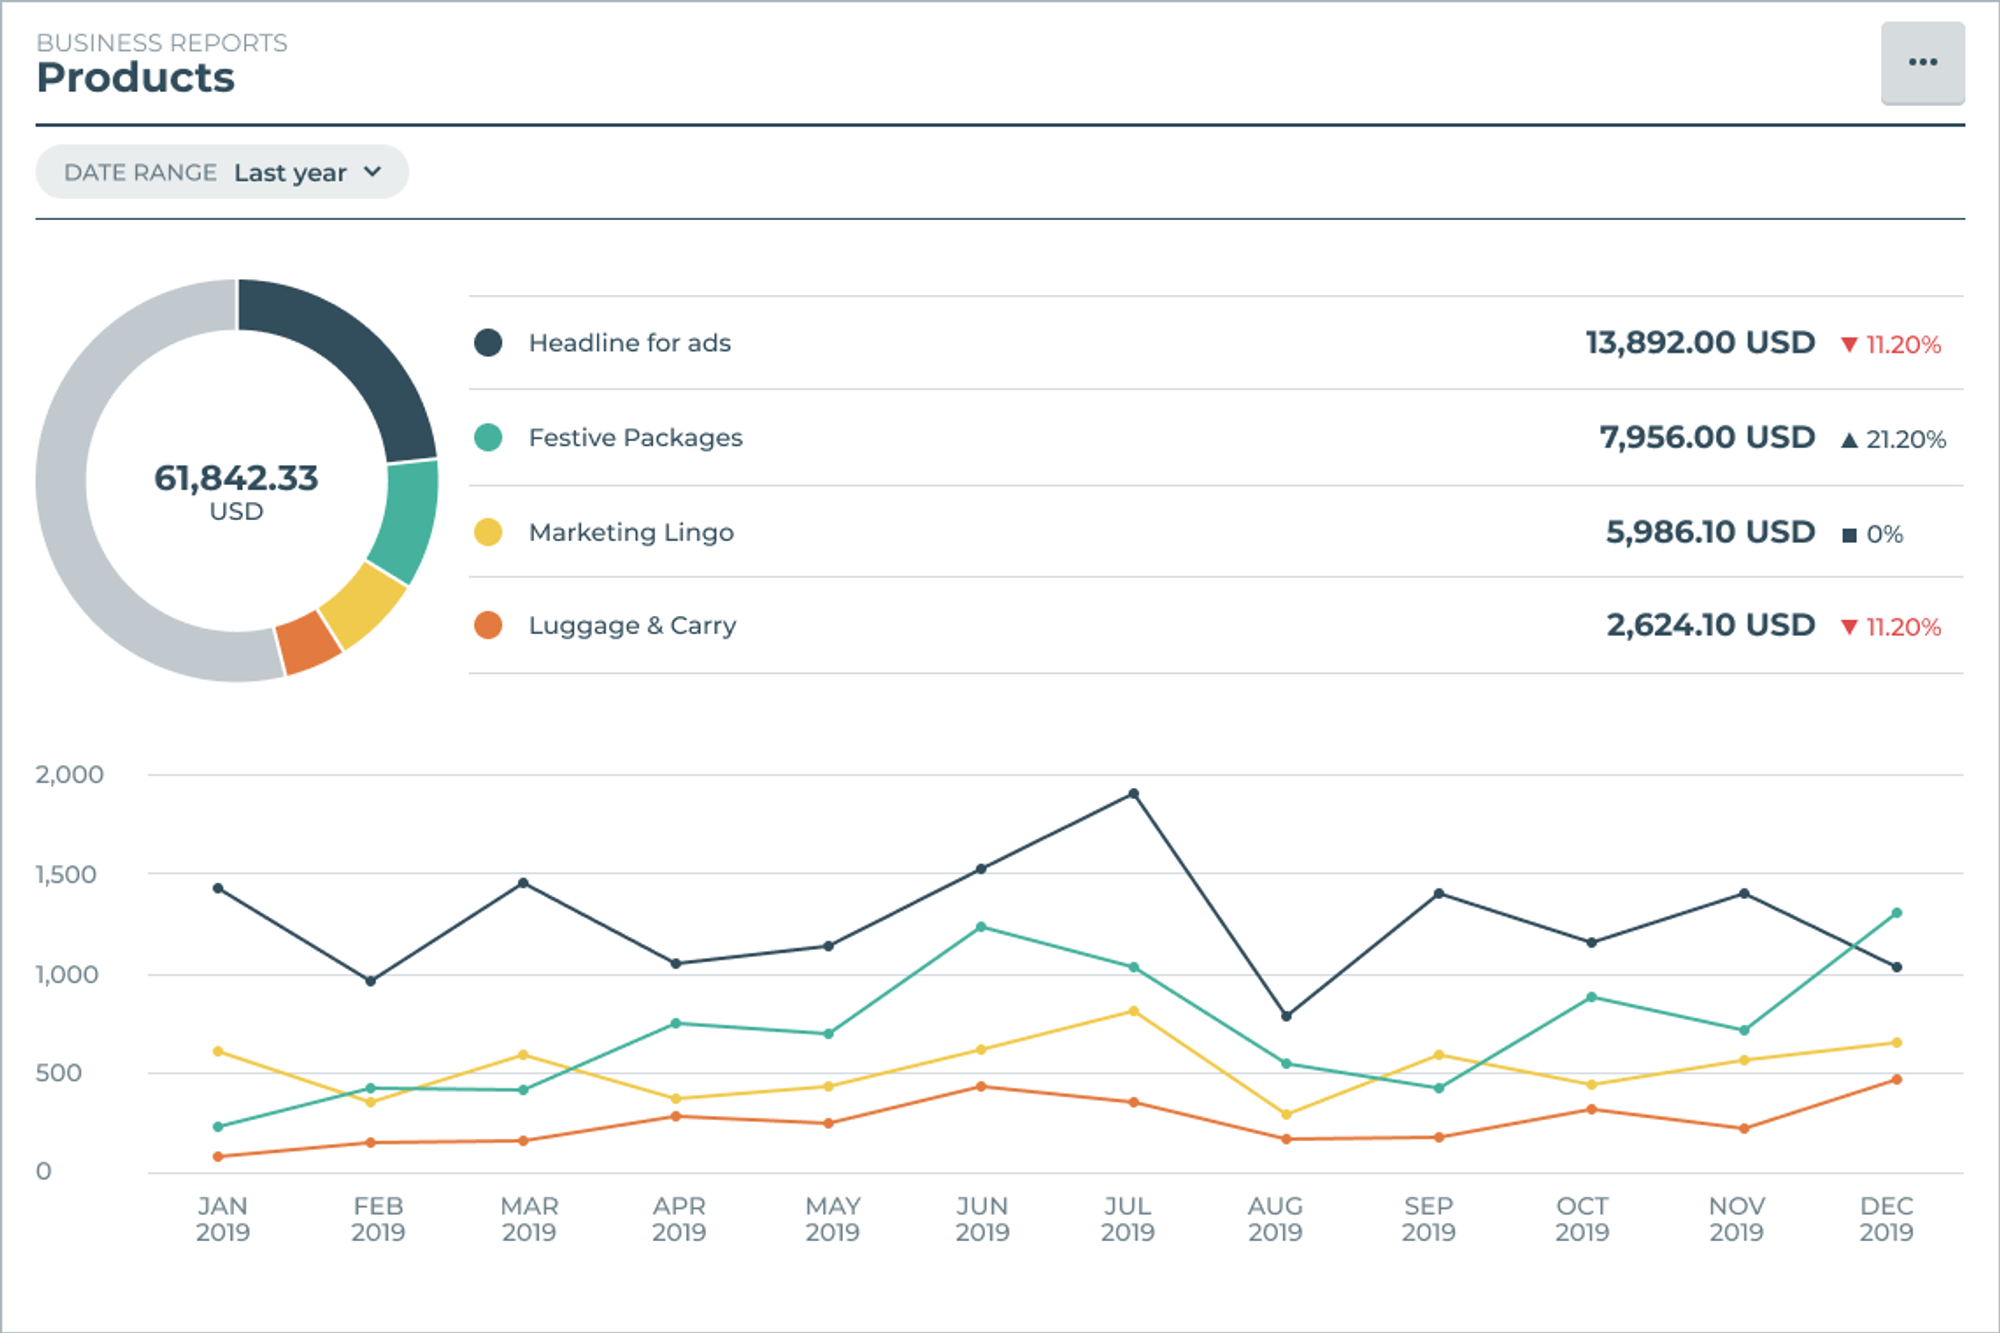 The products report displays a summary of sales by product.